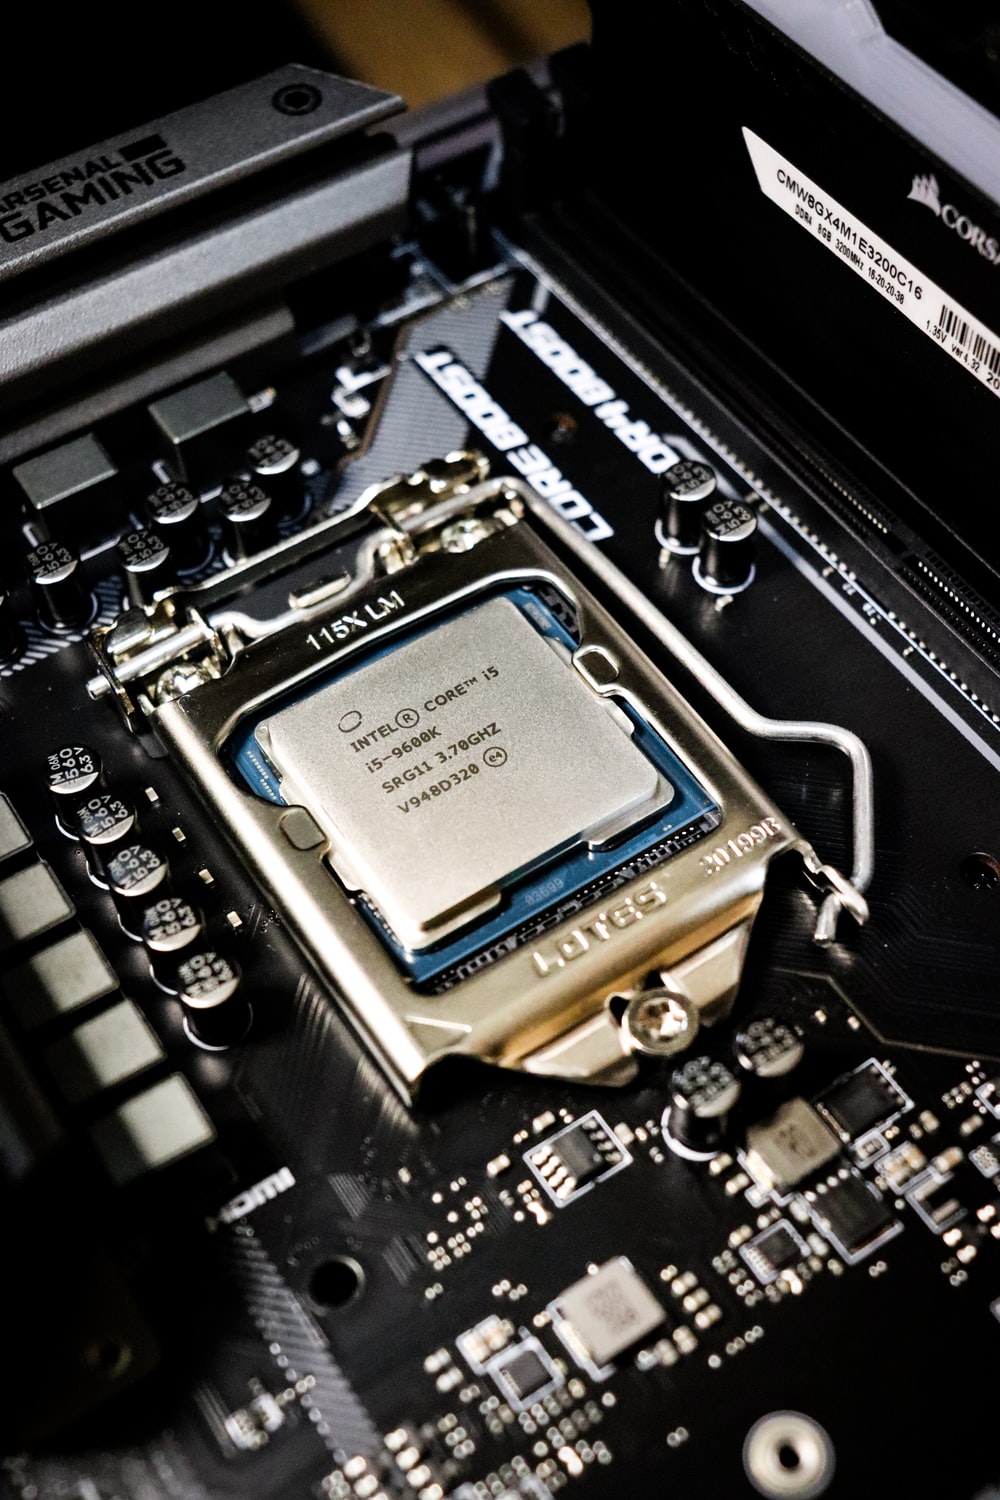 Cpu Picture. Download Free Image